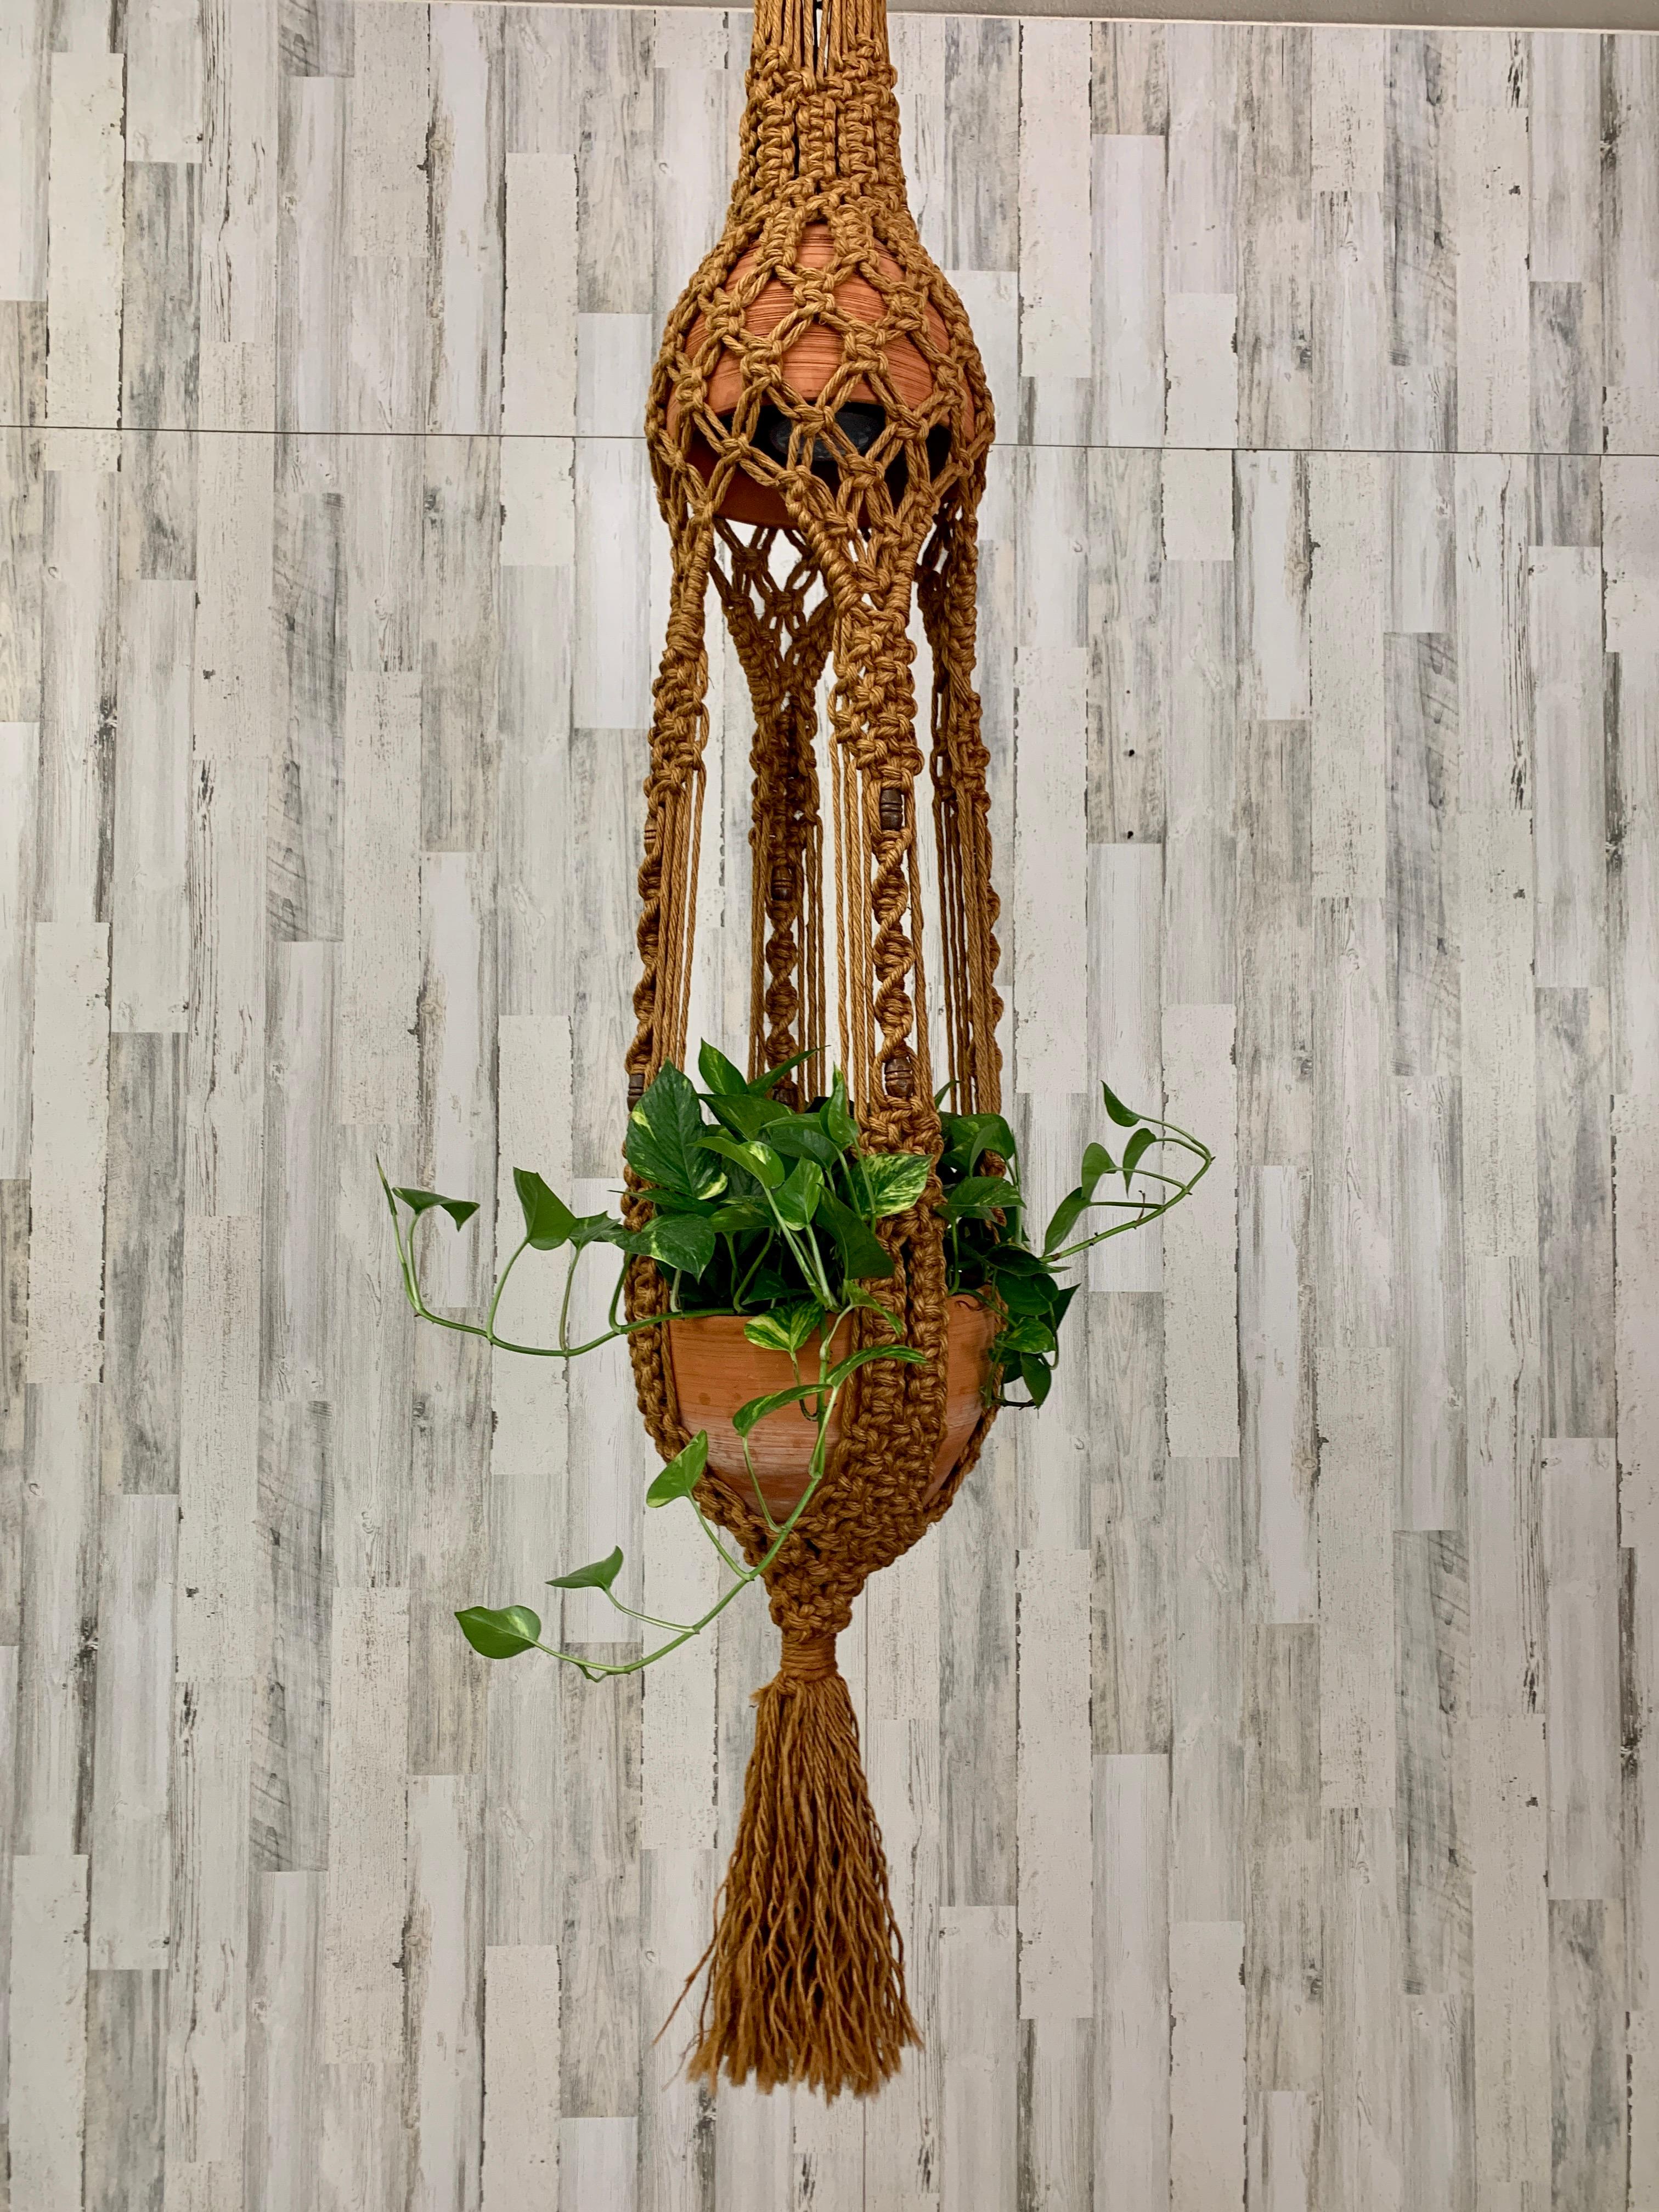 Vintage oversized complex design hand woven Jute with wood beads hanging macrame Lamp. This sculpture has opposing terra cotta pottery one for the lamp shade and one for the plant.